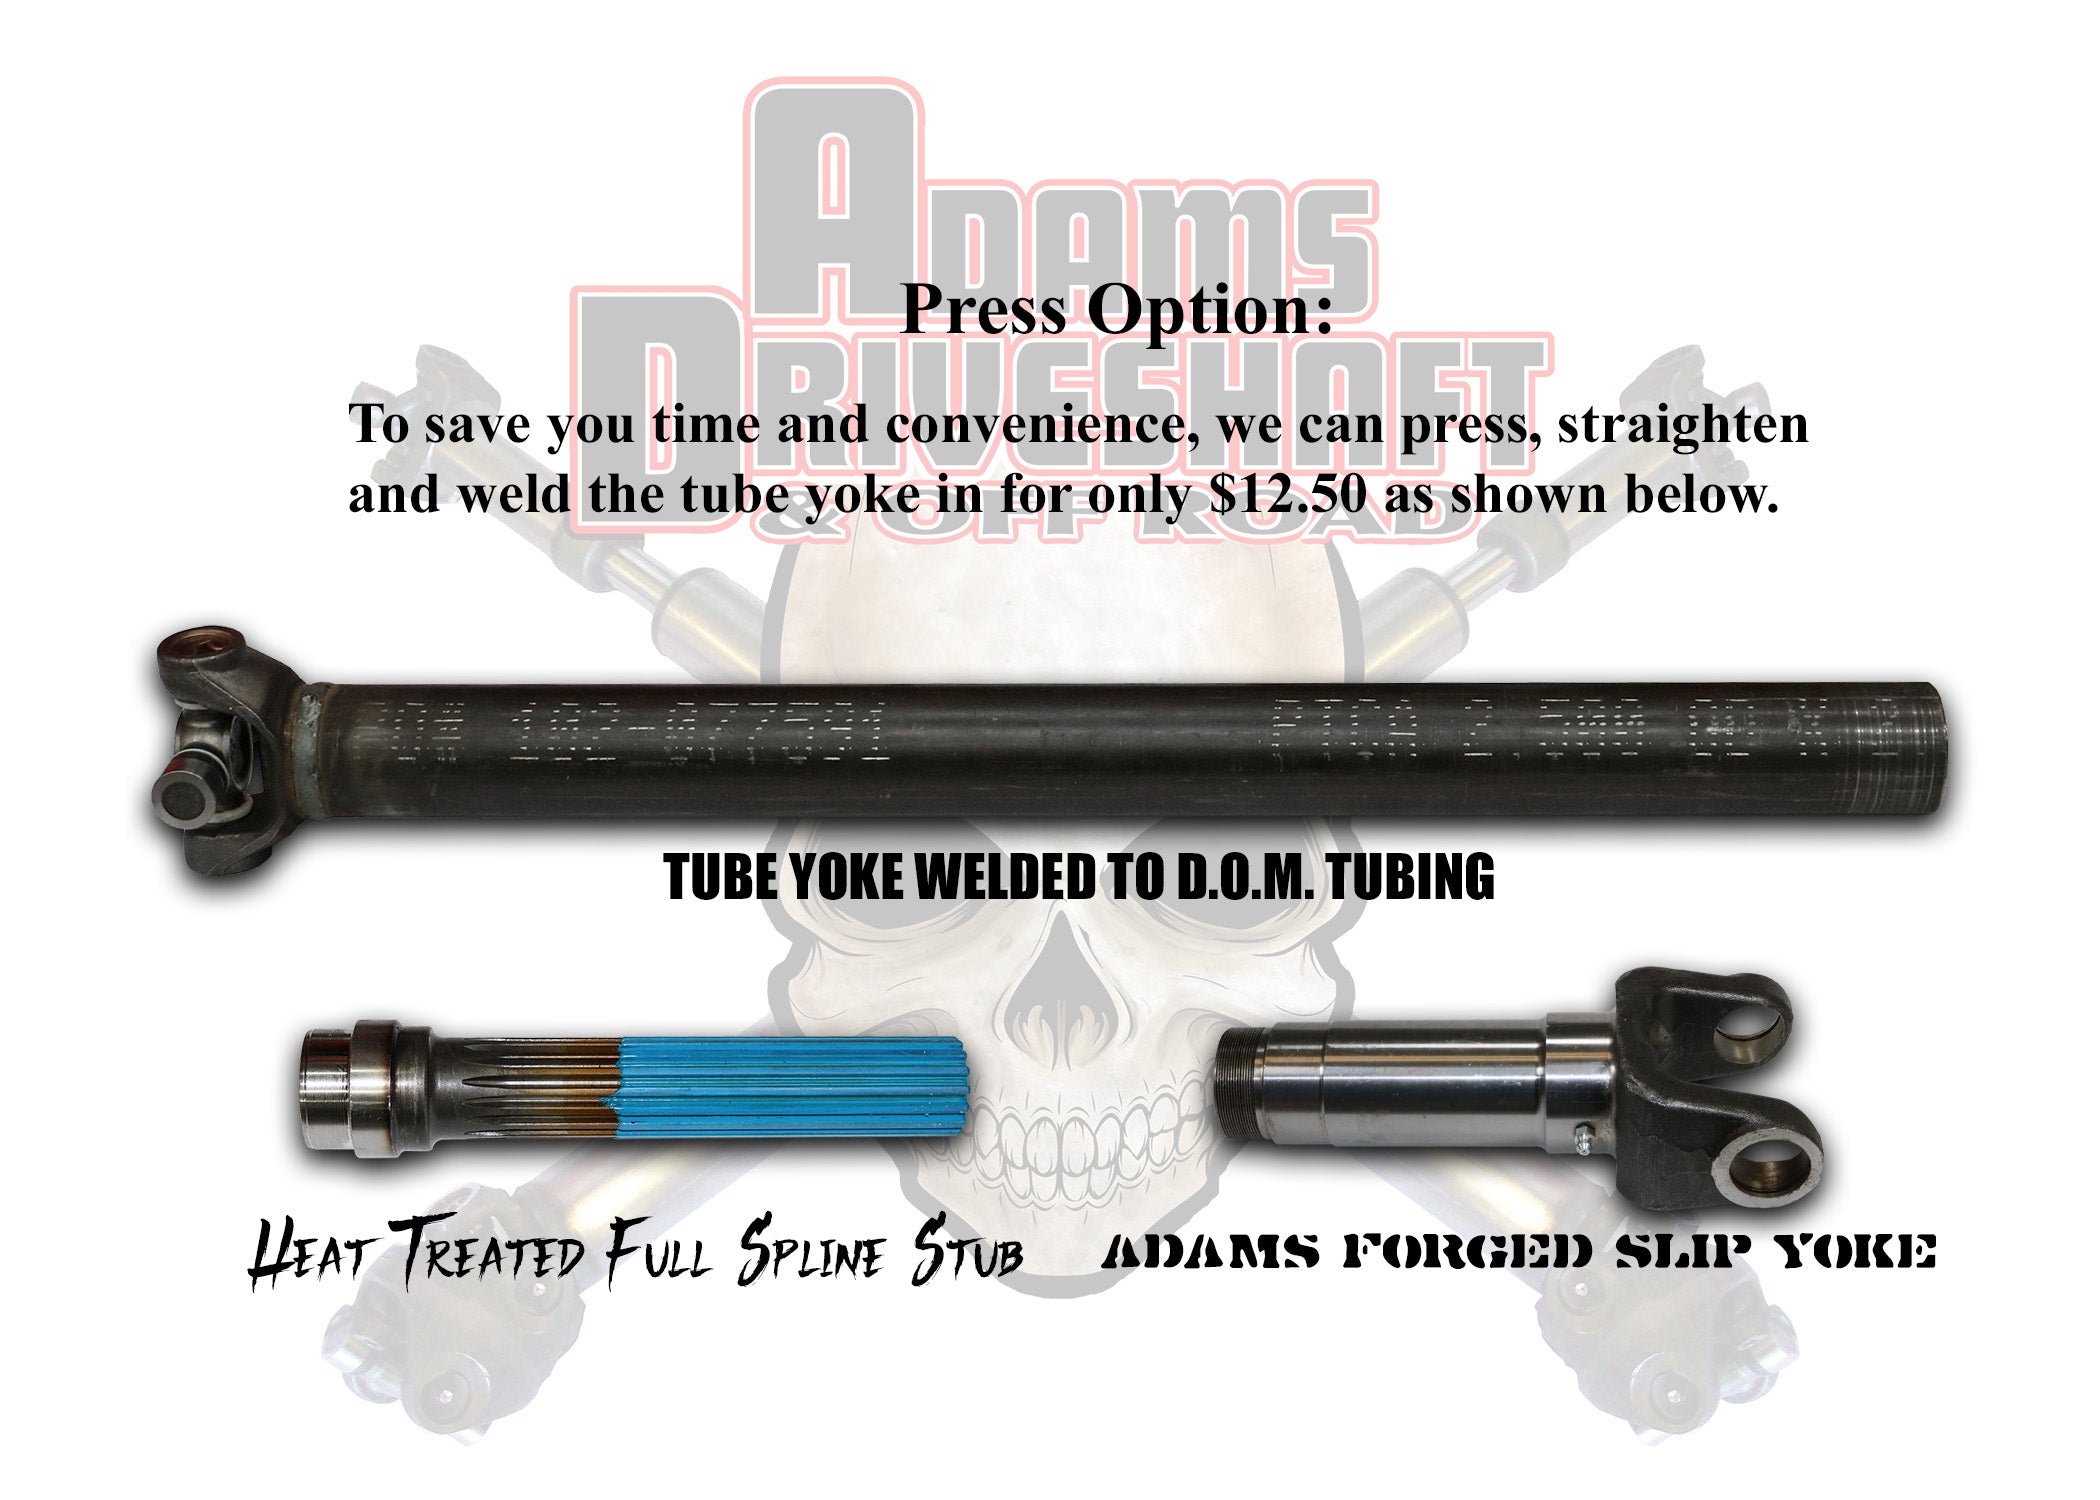 Adams Driveshaft's Build your Own - DIY - Offroad Buggy, Jeep Driveshaft, Etc. in 1350 Series